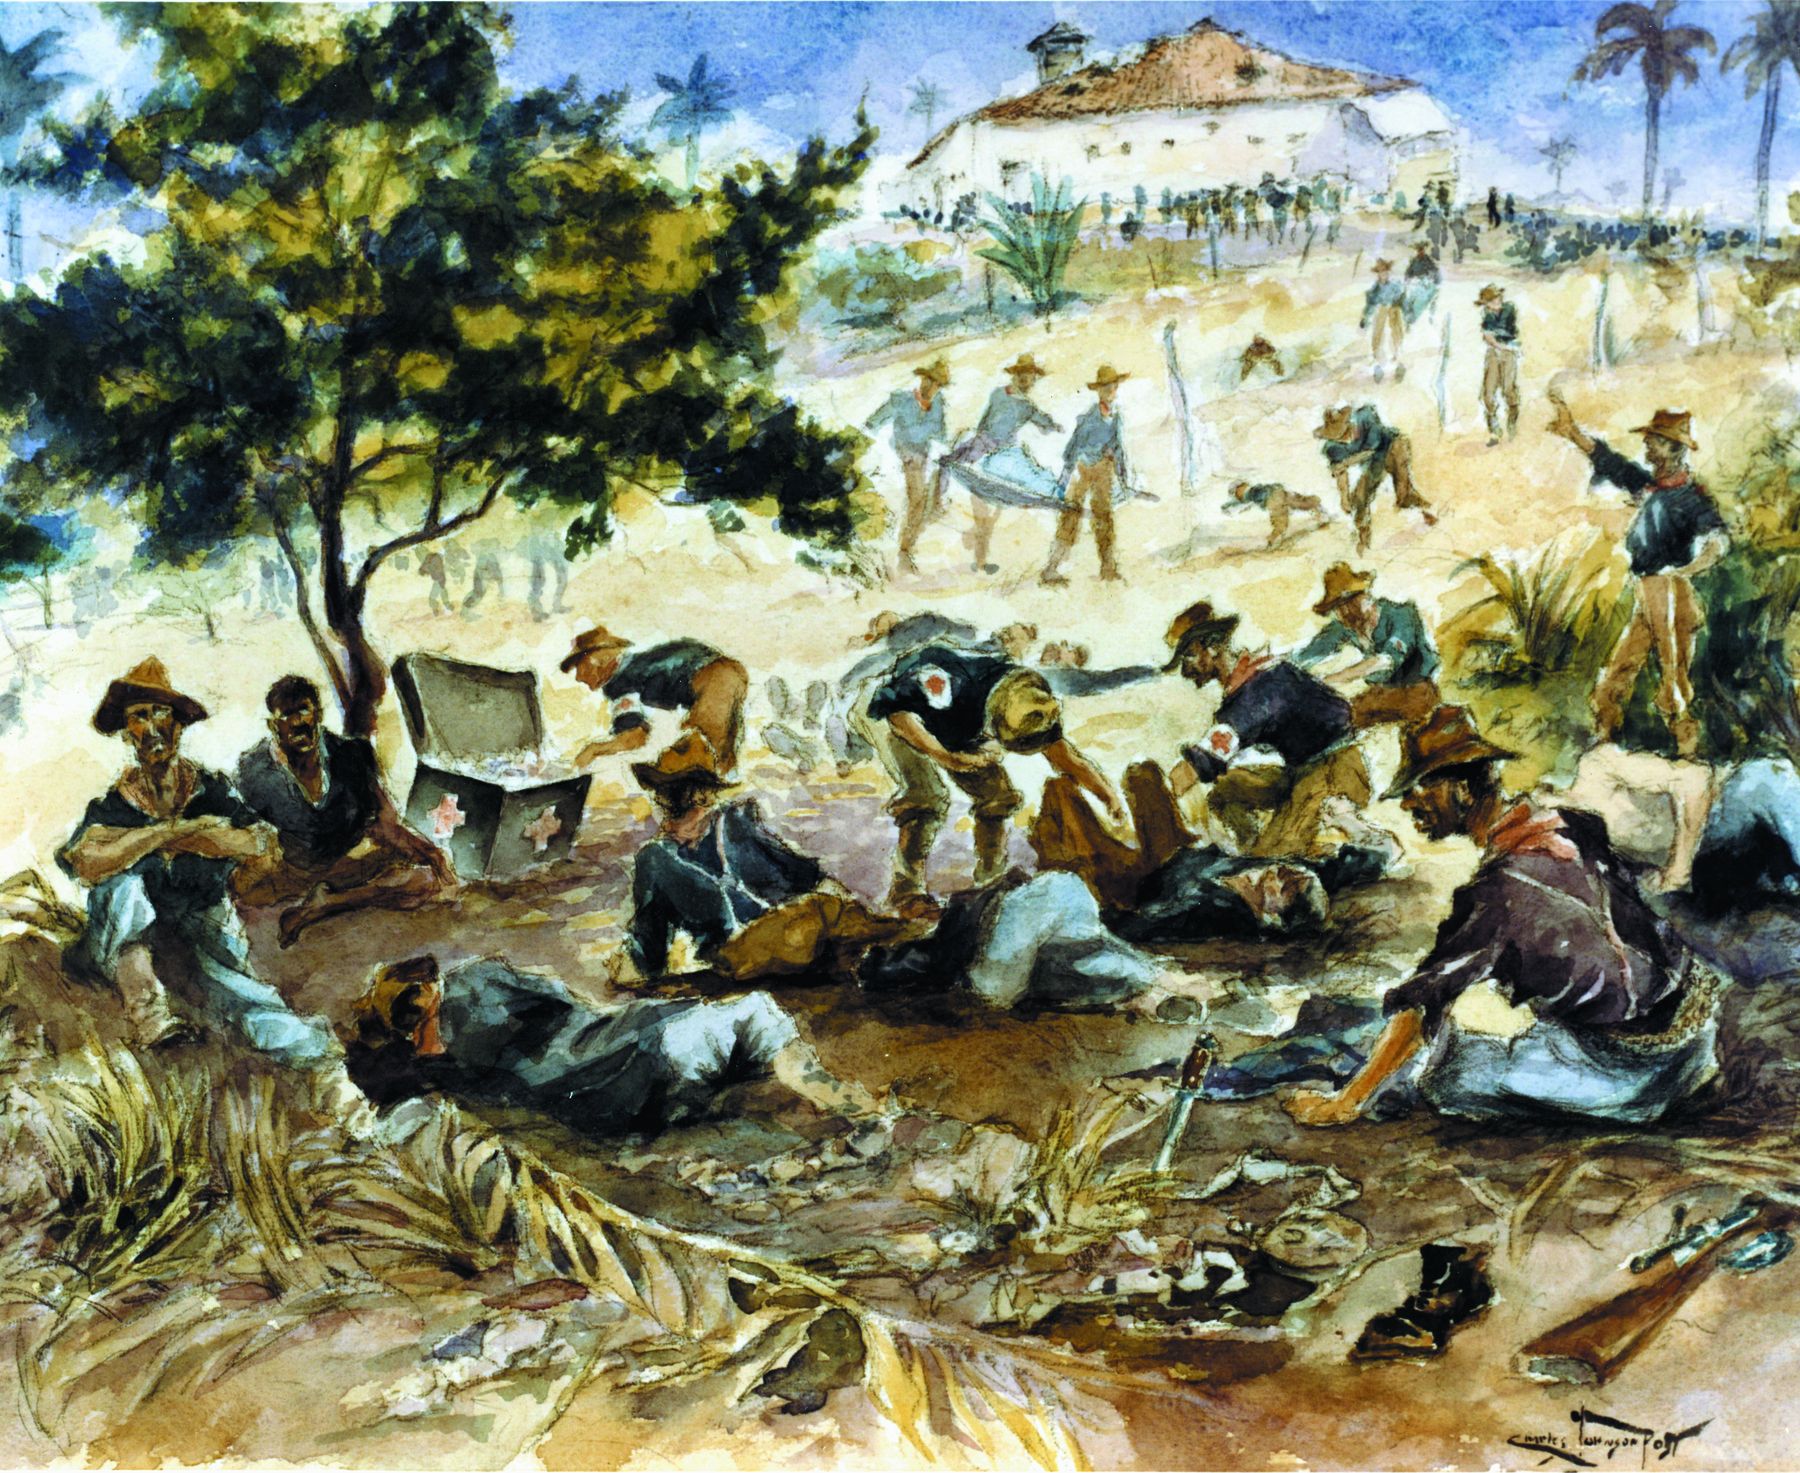 A field hospital behind the American lines. Painting by Charles J. Post.